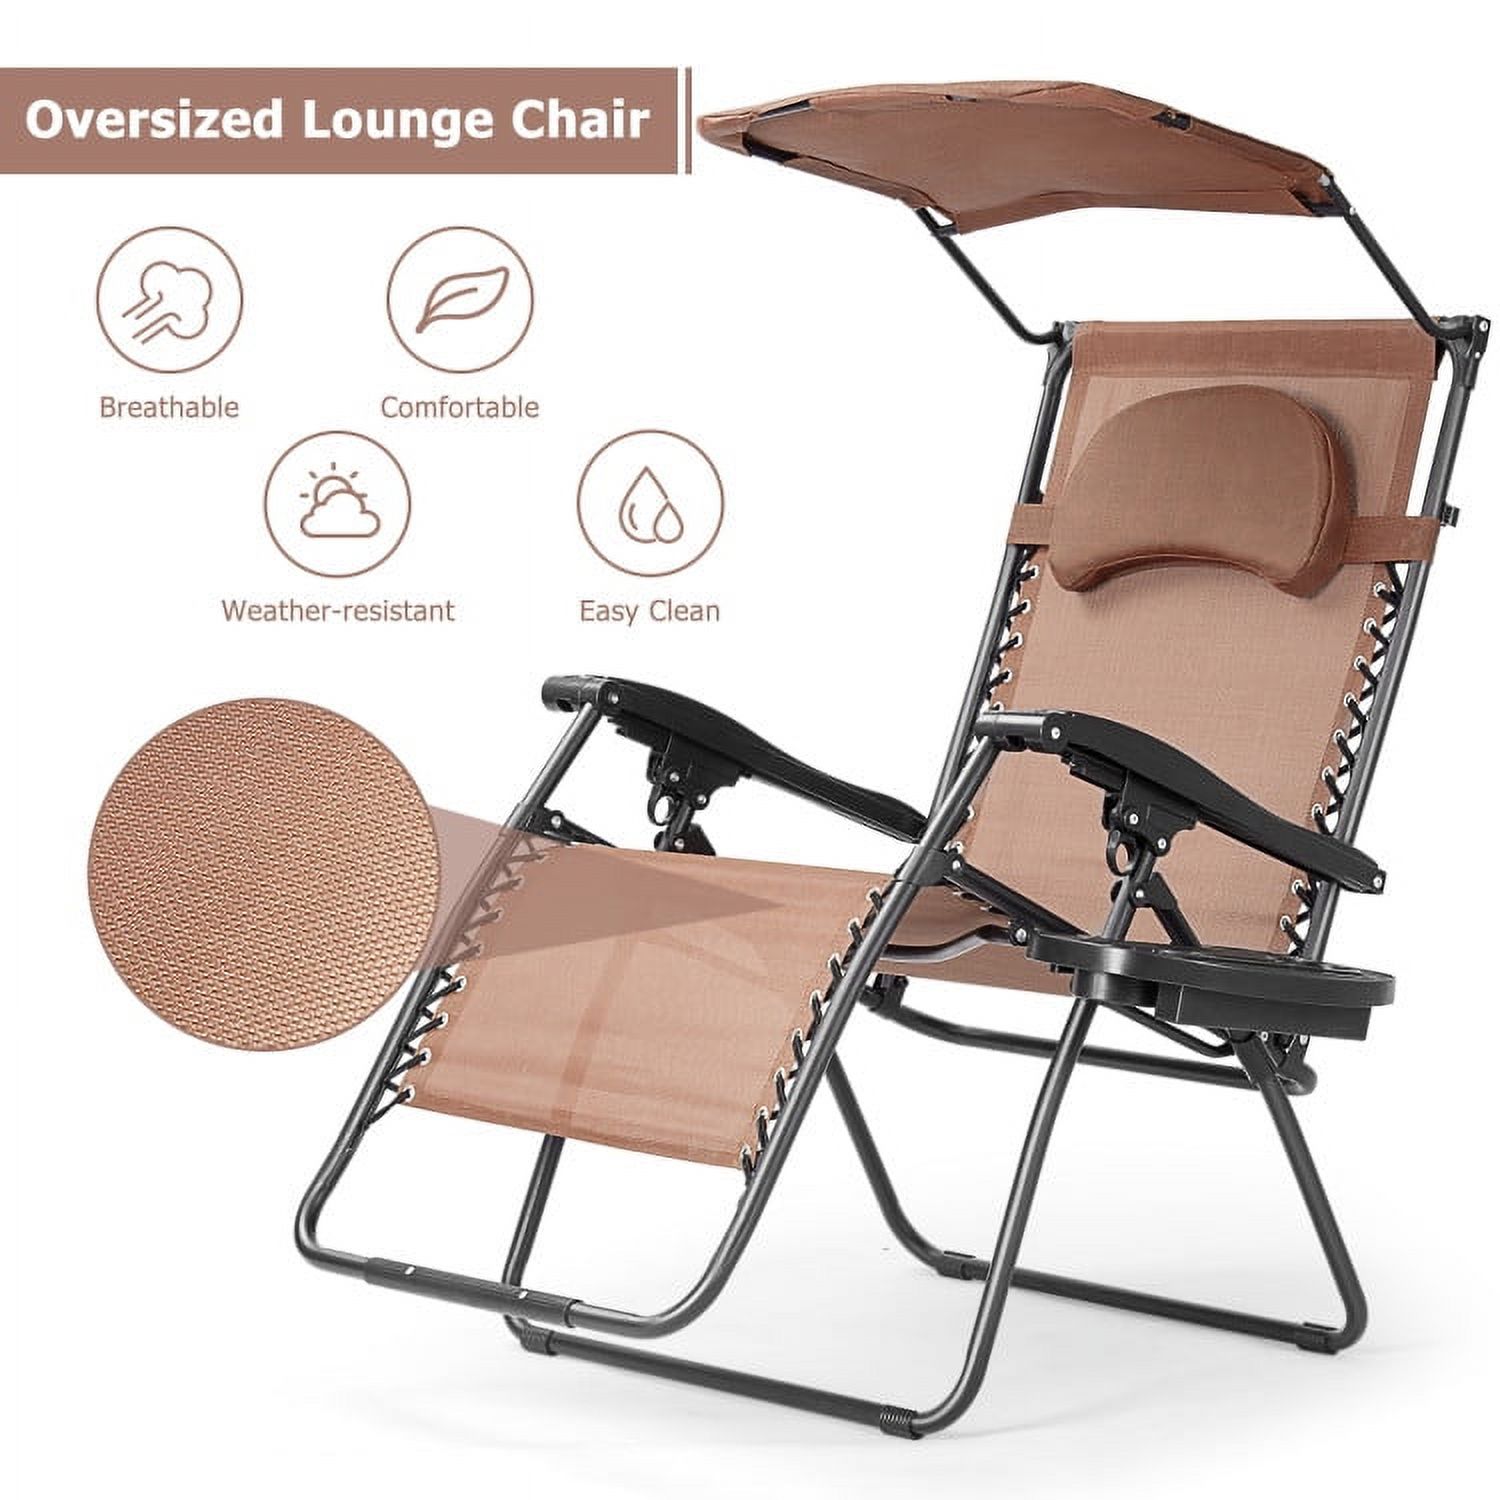 Folding Recliner Lounge Chair with Shade Canopy Cup Holder - image 2 of 6